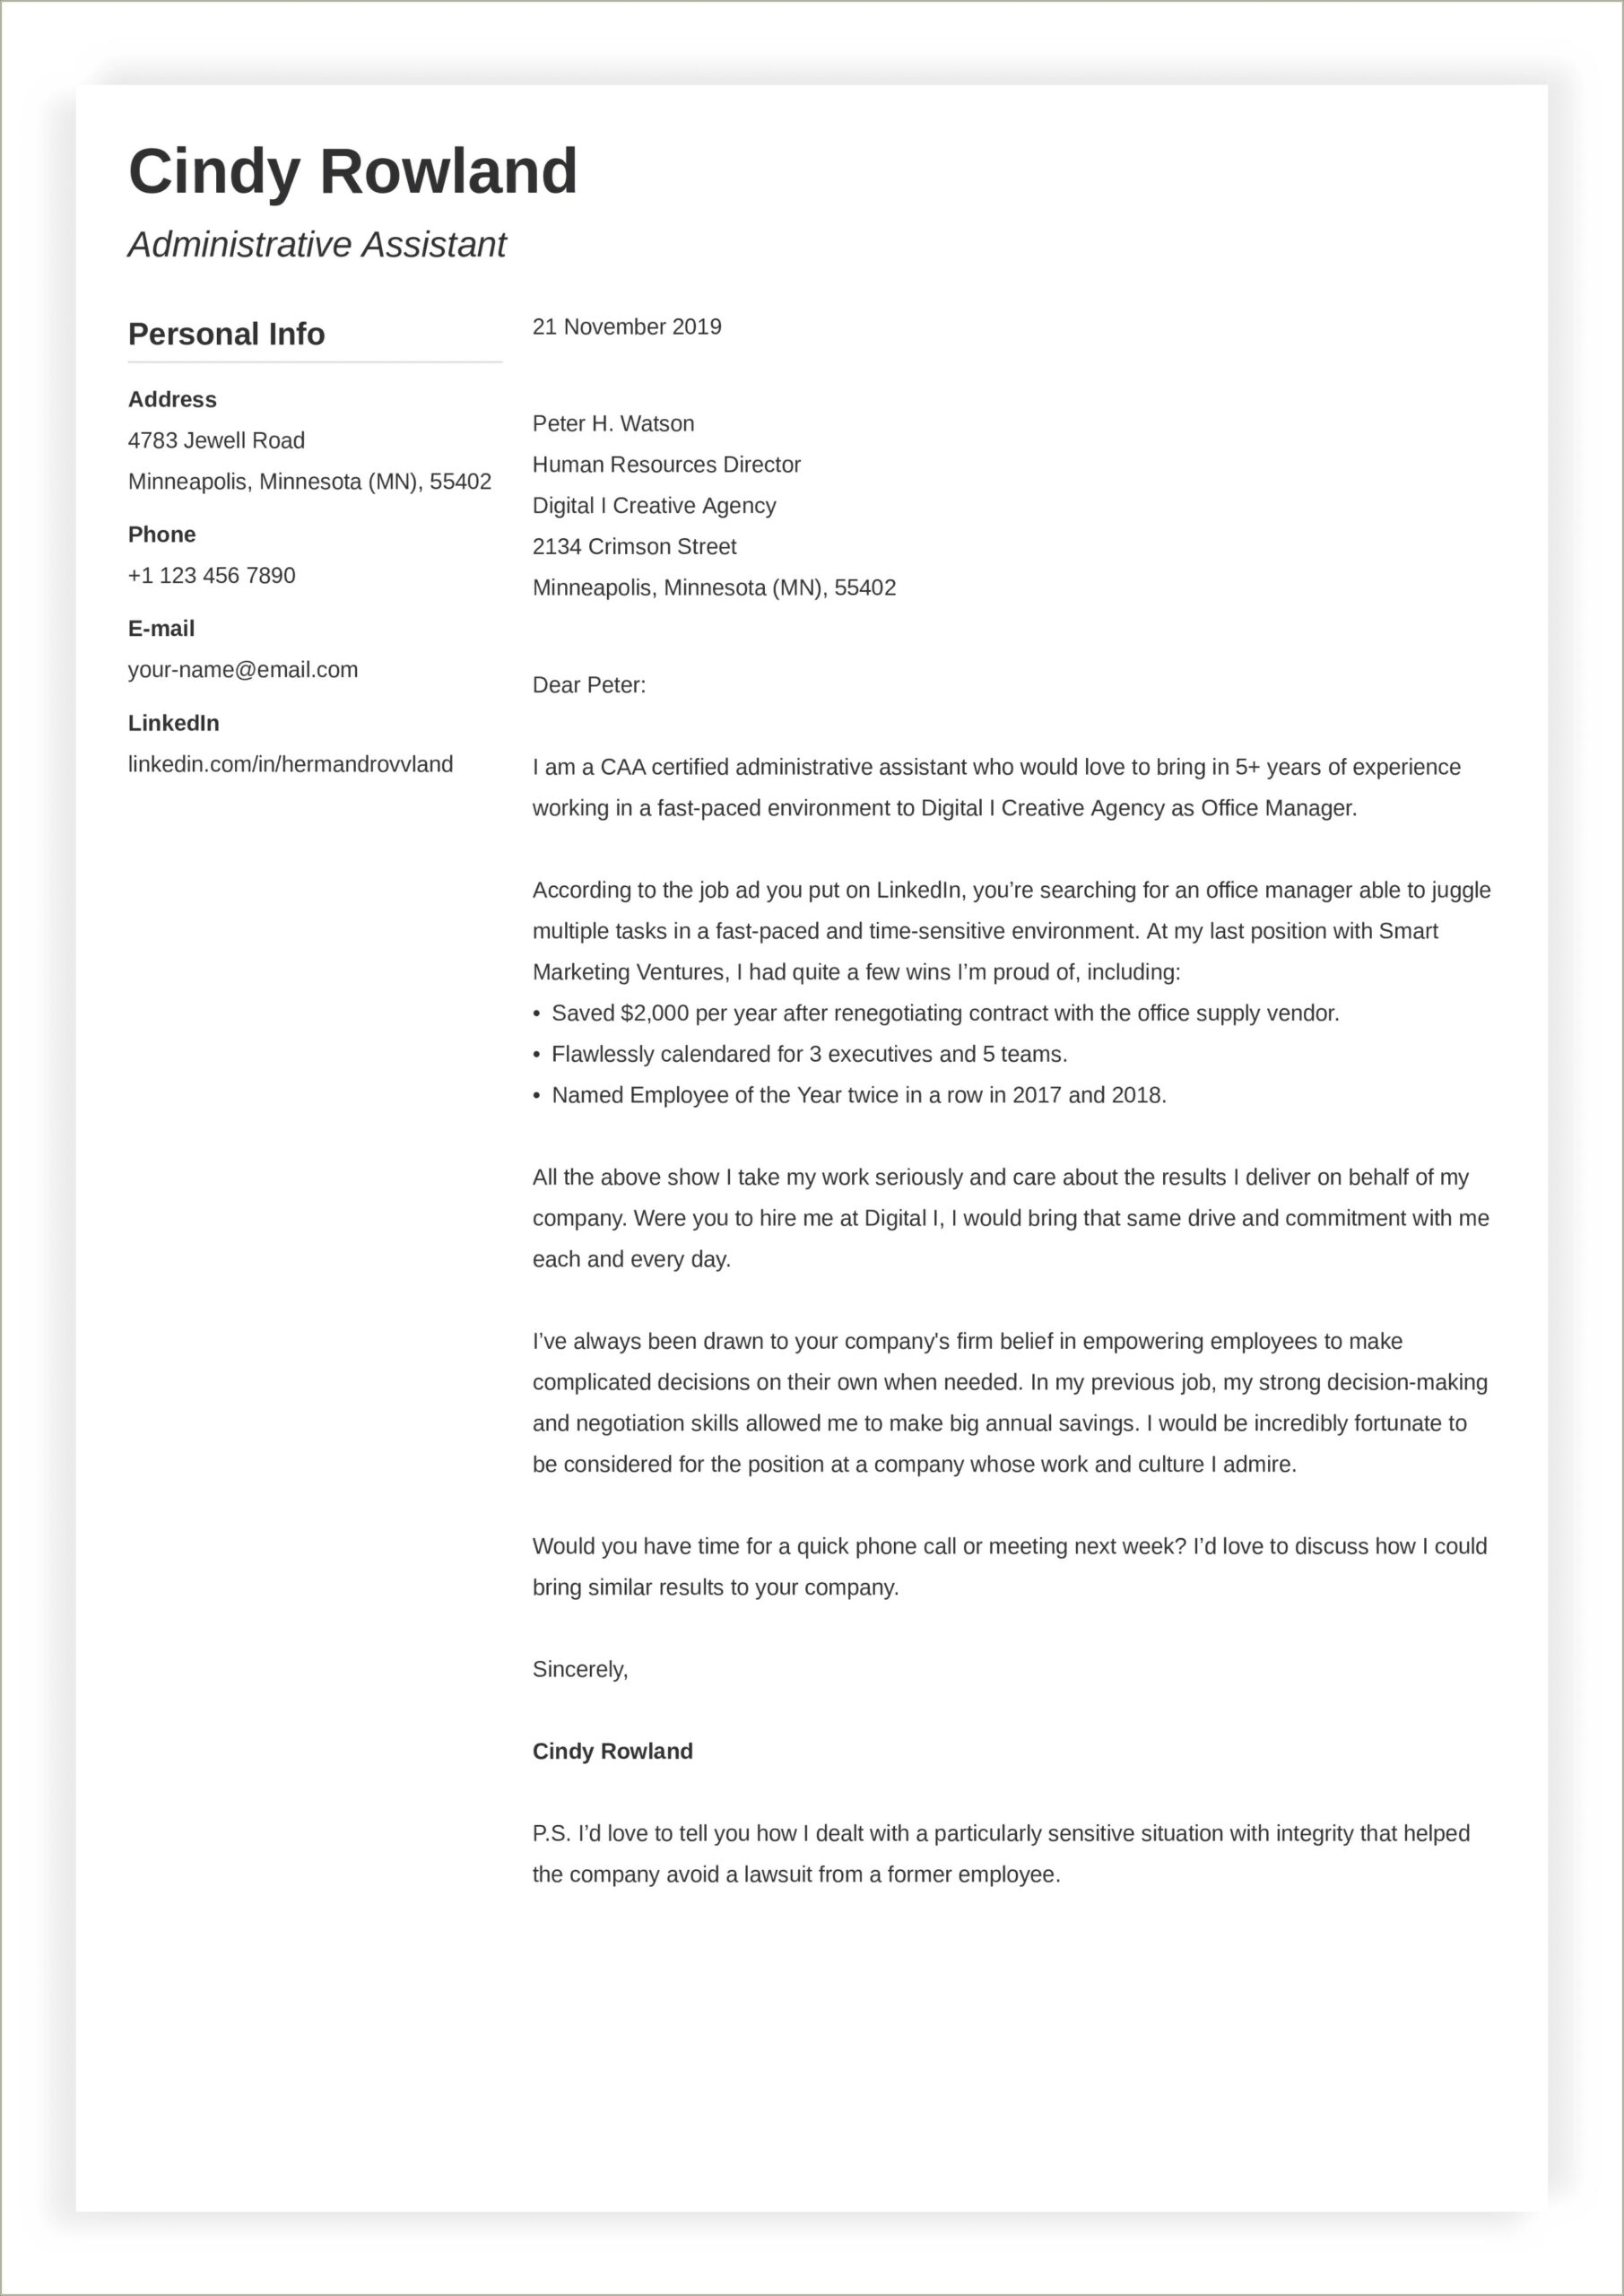 Email Setup For Resume And Cover Letter Submition